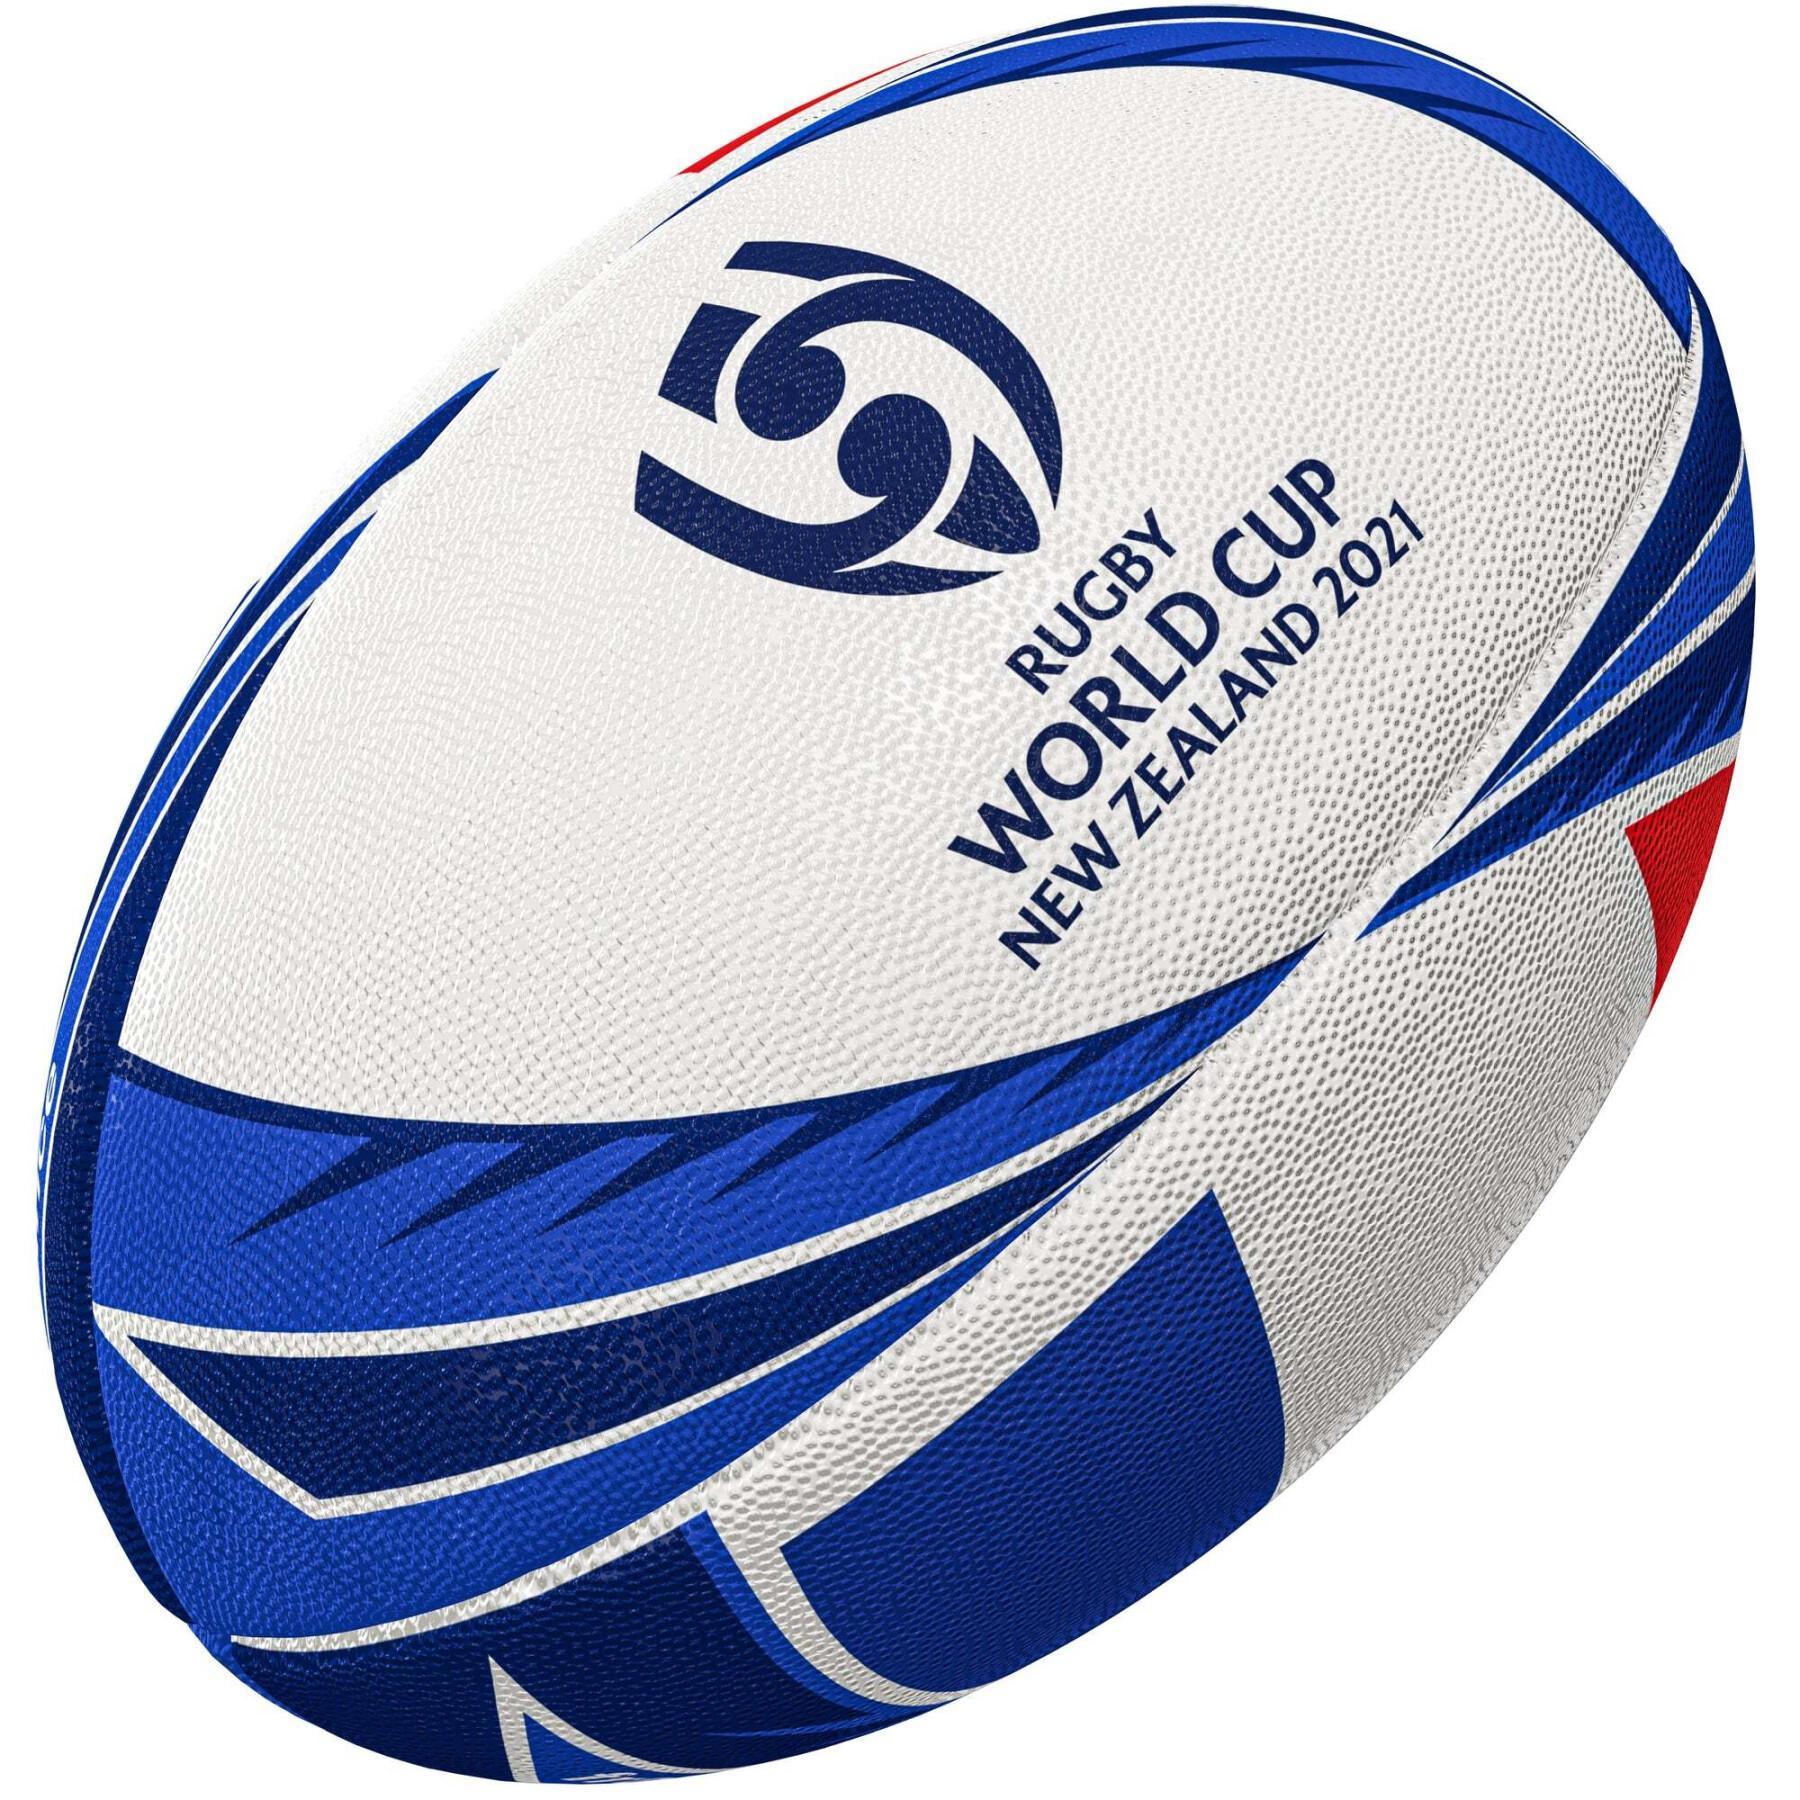 Bola de Rugby France Rugby Wolrd Cup 2021